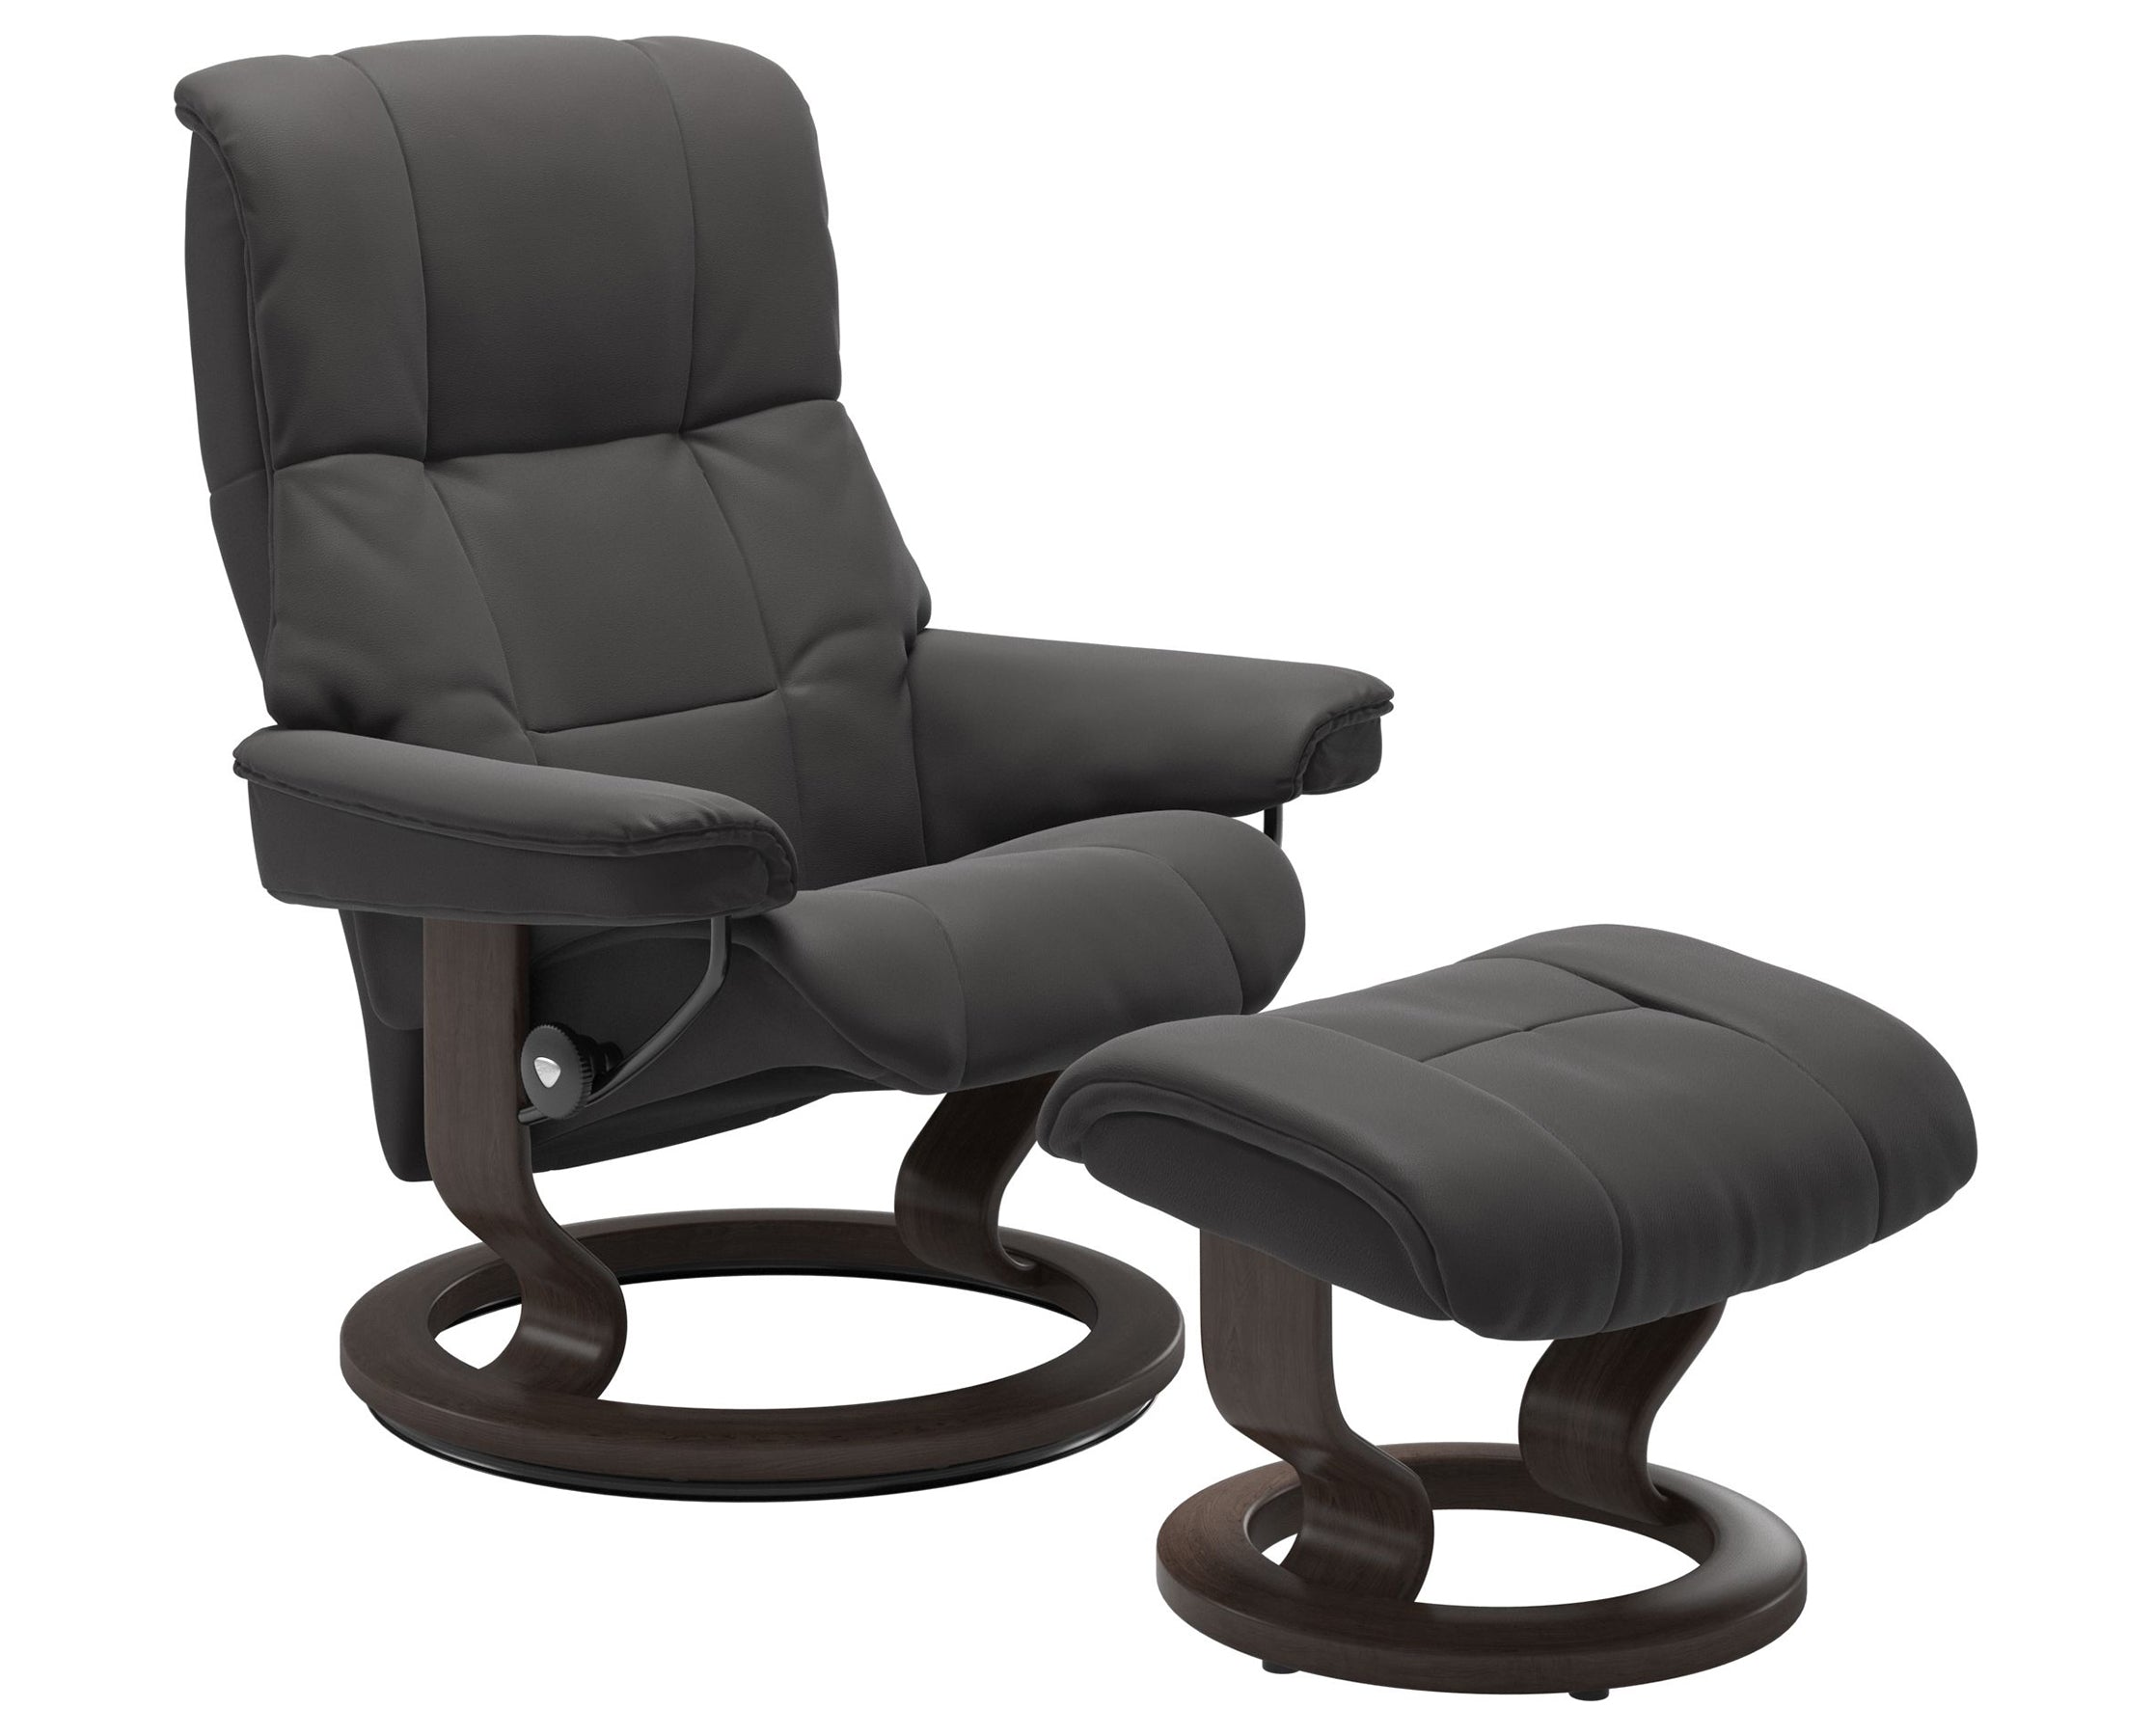 Paloma Leather Rock S/M/L and Wenge Base | Stressless Mayfair Classic Recliner | Valley Ridge Furniture